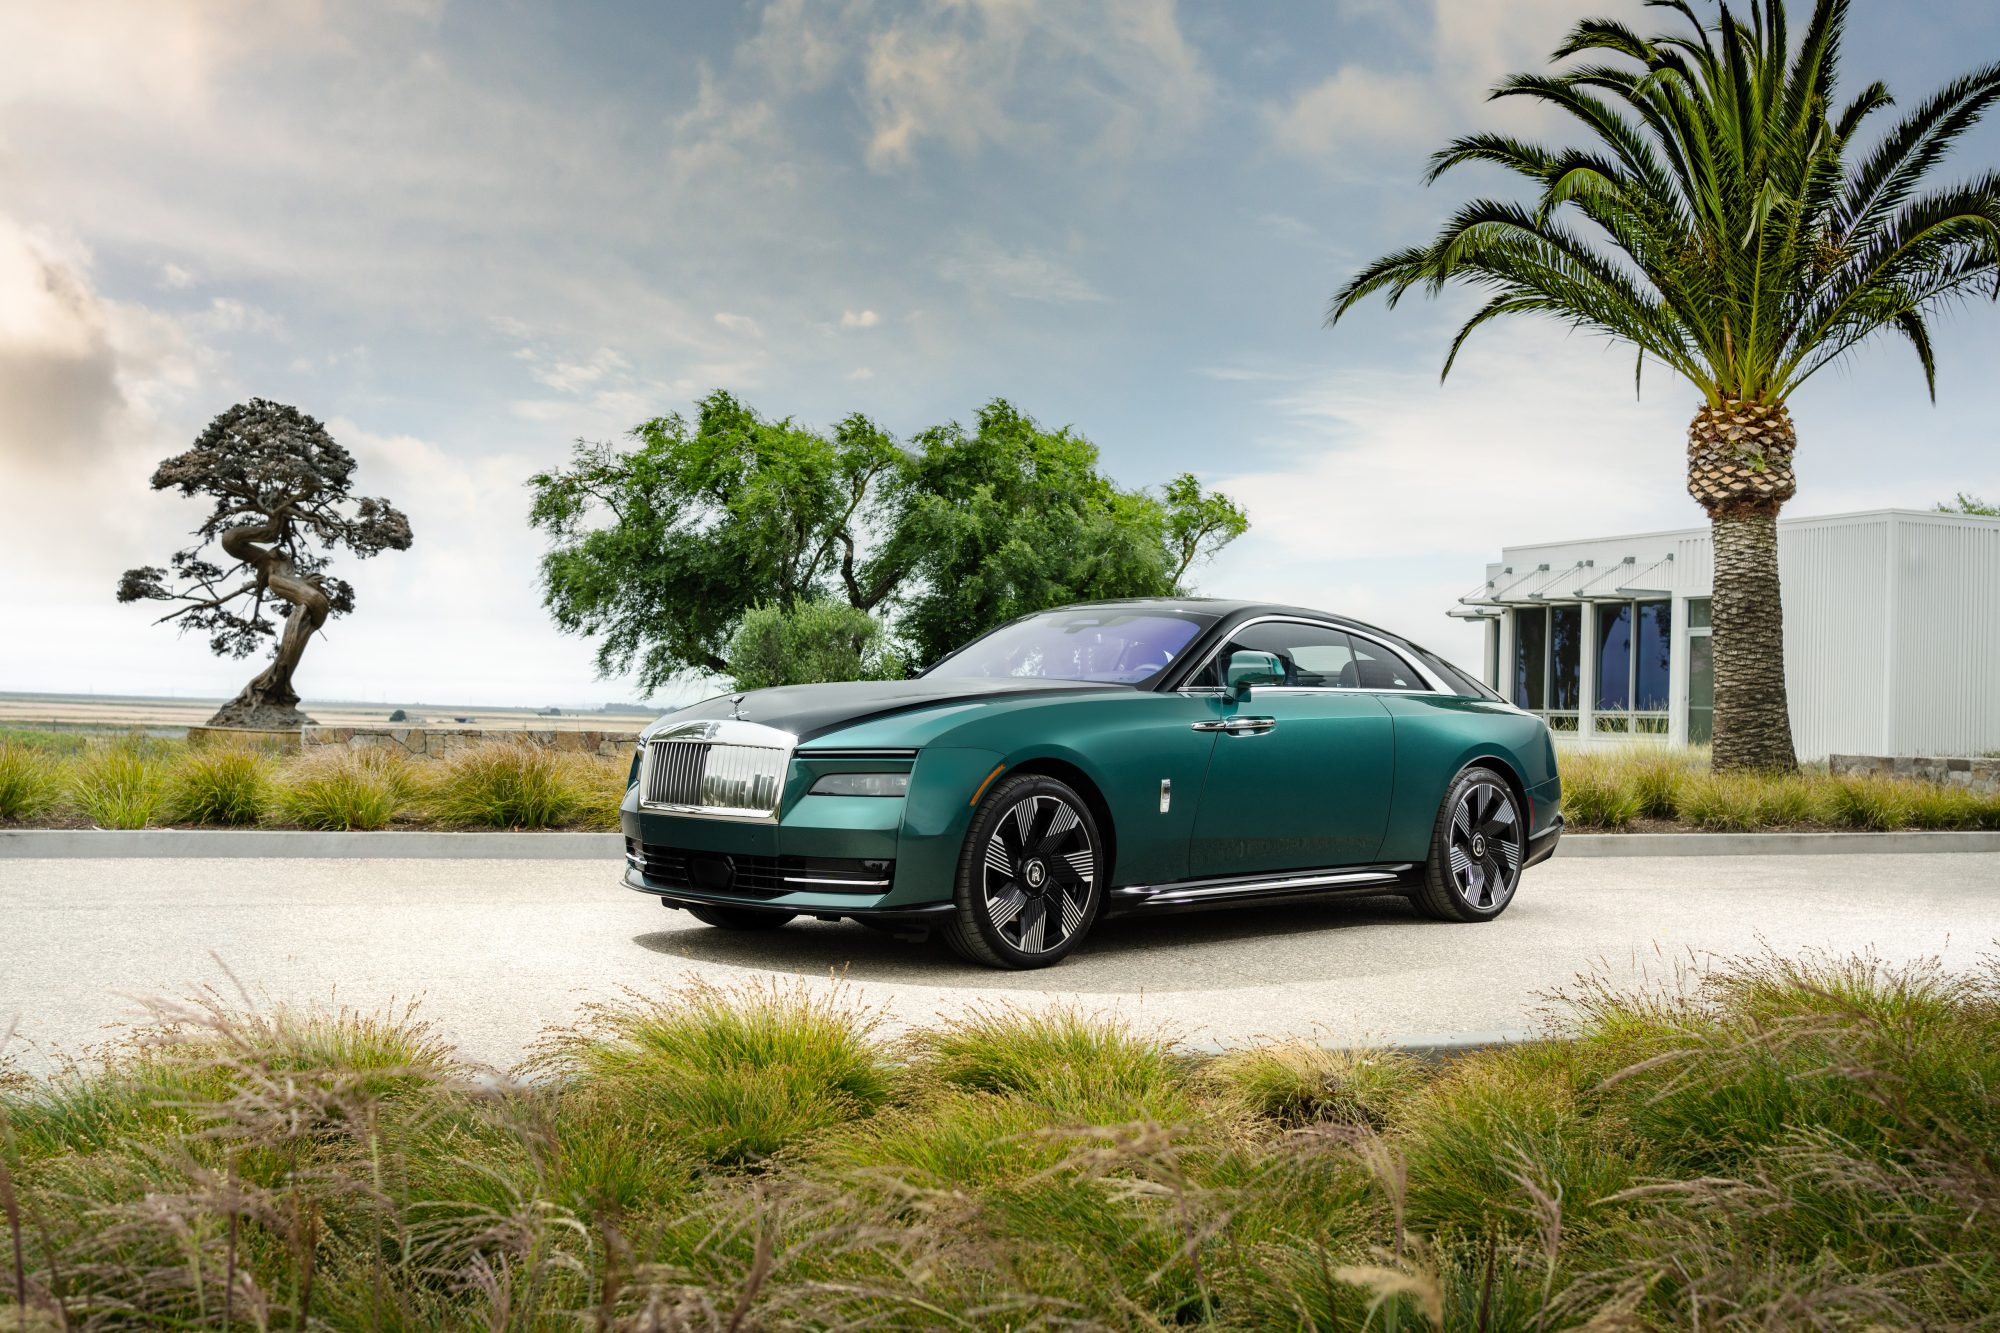 Rolls-Royce Spectre: The Rolls-Royce that changes everything